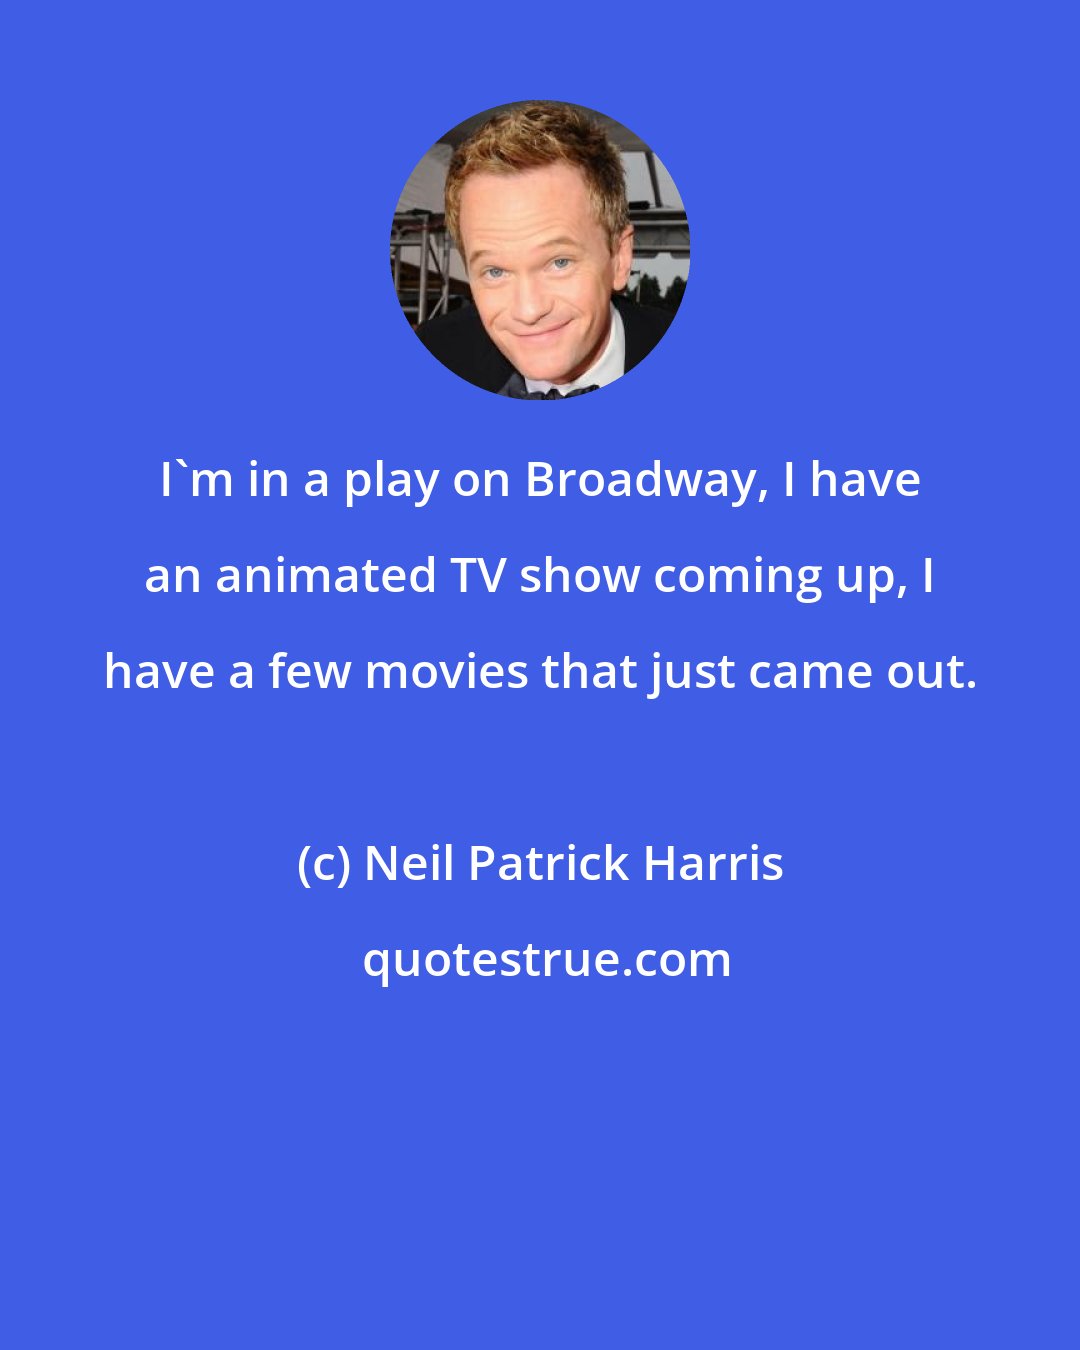 Neil Patrick Harris: I'm in a play on Broadway, I have an animated TV show coming up, I have a few movies that just came out.